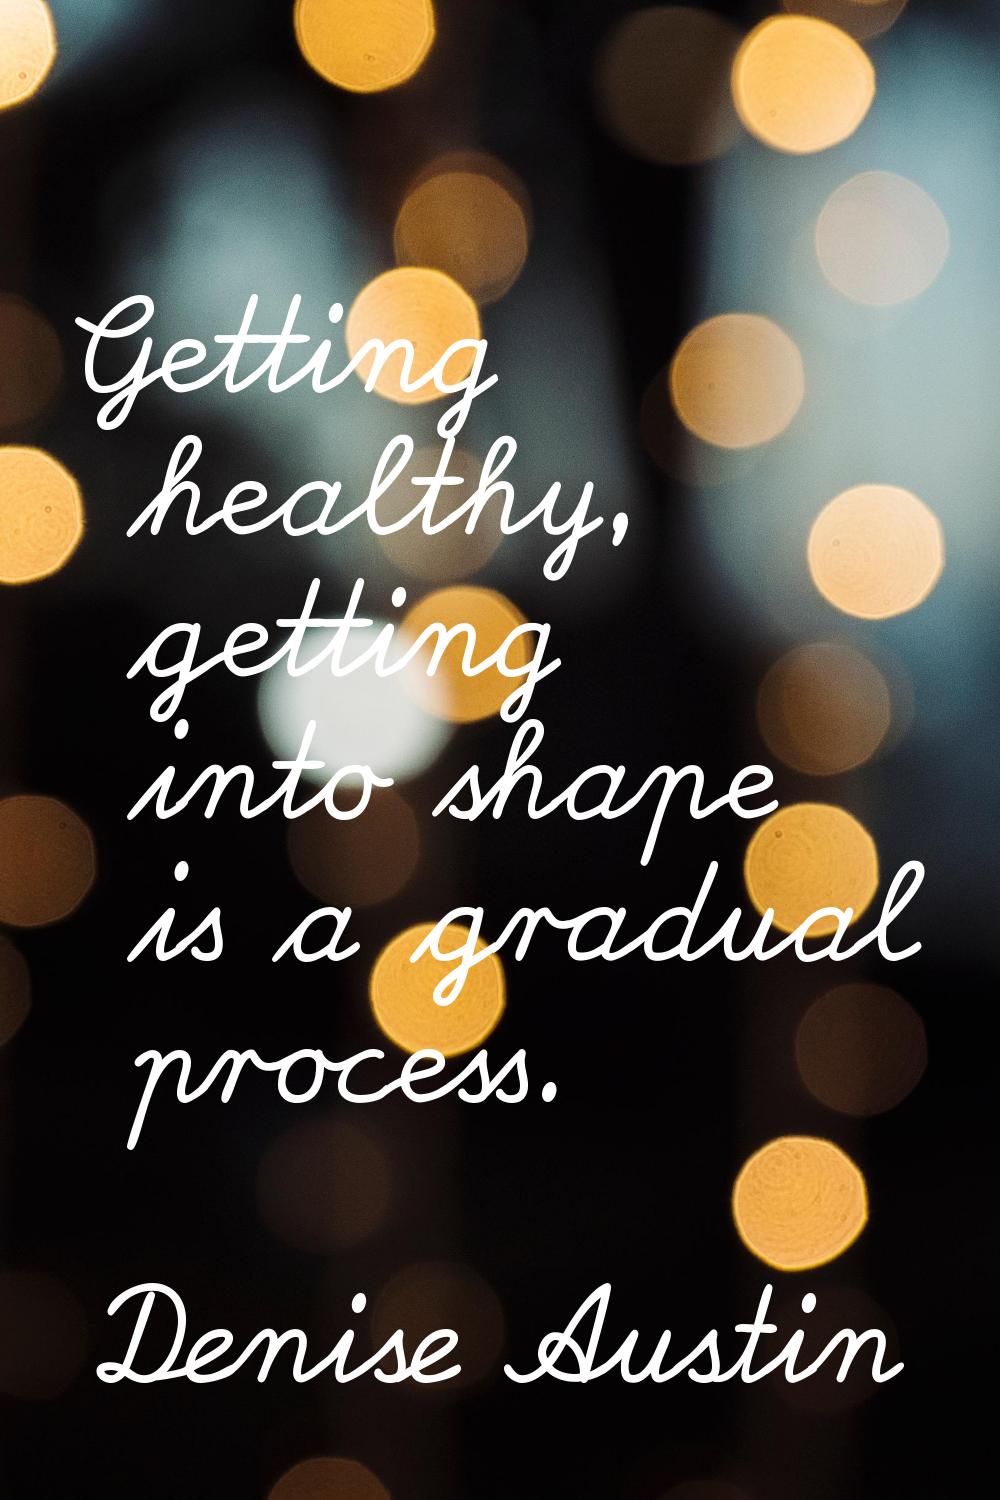 Getting healthy, getting into shape is a gradual process.